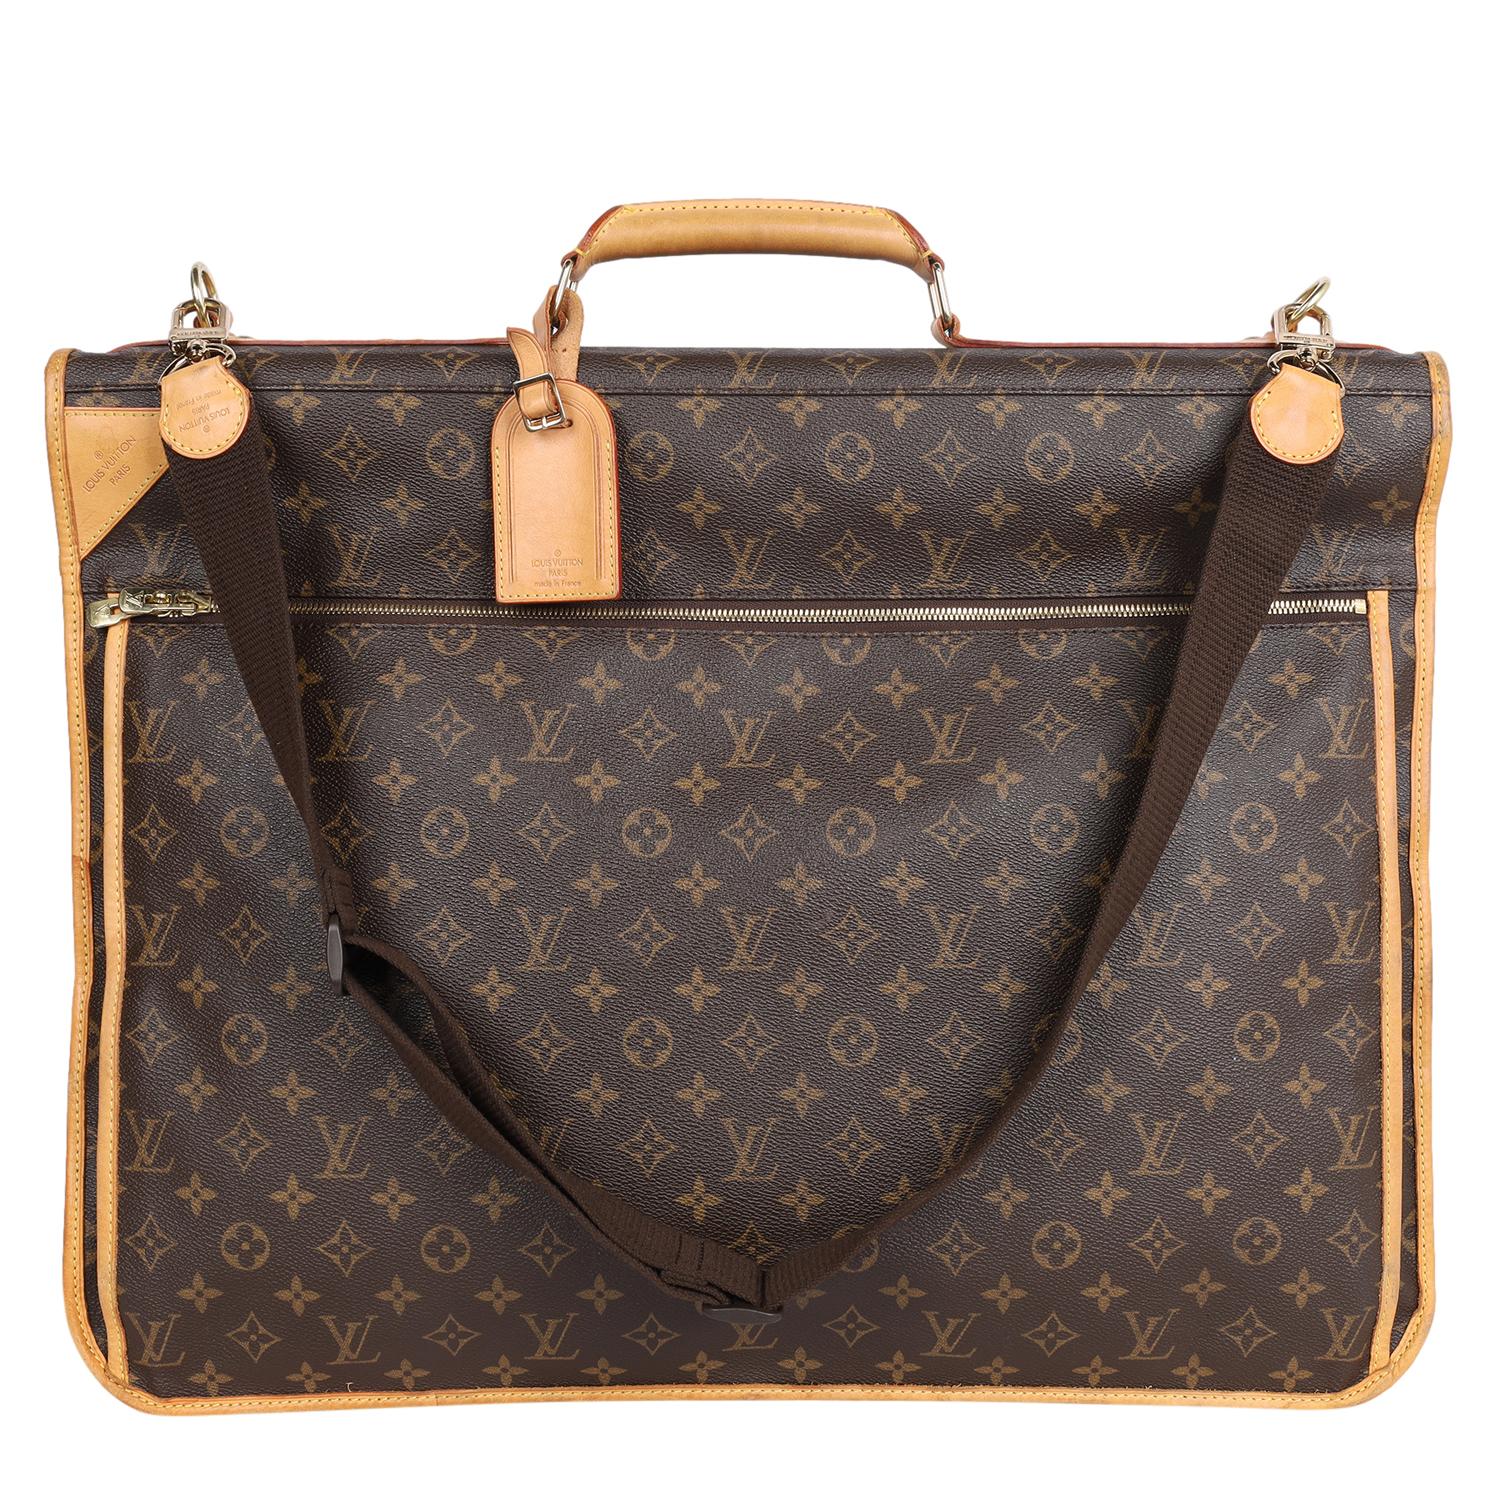 Authentic, pre-loved Louis Vuitton brown monogram portable garment bag suitcase. Features monogram canvas, a zip-around closure with monogrammed zippers, gold-toned hardware, a removable/adjustable shoulder strap, leather handle, and a removable